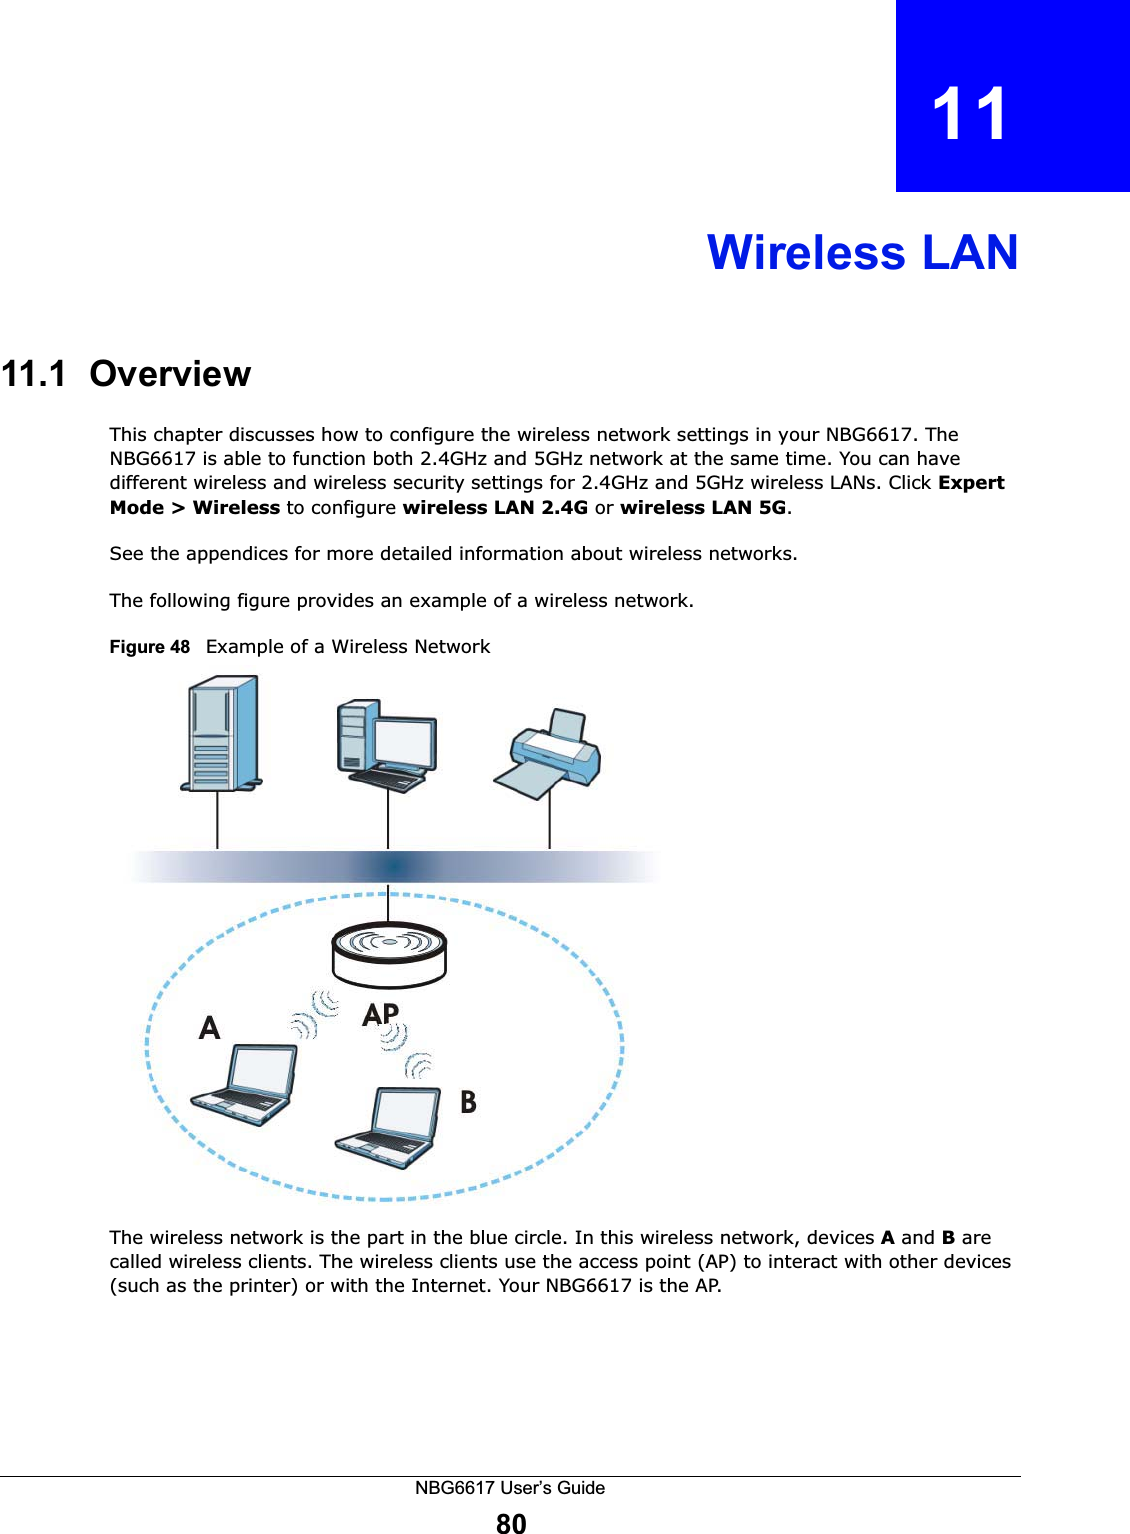 NBG6617 User’s Guide80CHAPTER   11Wireless LAN11.1  OverviewThis chapter discusses how to configure the wireless network settings in your NBG6617. The NBG6617 is able to function both 2.4GHz and 5GHz network at the same time. You can have different wireless and wireless security settings for 2.4GHz and 5GHz wireless LANs. Click Expert Mode &gt; Wireless to configure wireless LAN 2.4G or wireless LAN 5G.See the appendices for more detailed information about wireless networks.The following figure provides an example of a wireless network.Figure 48   Example of a Wireless NetworkThe wireless network is the part in the blue circle. In this wireless network, devices A and B are called wireless clients. The wireless clients use the access point (AP) to interact with other devices (such as the printer) or with the Internet. Your NBG6617 is the AP.